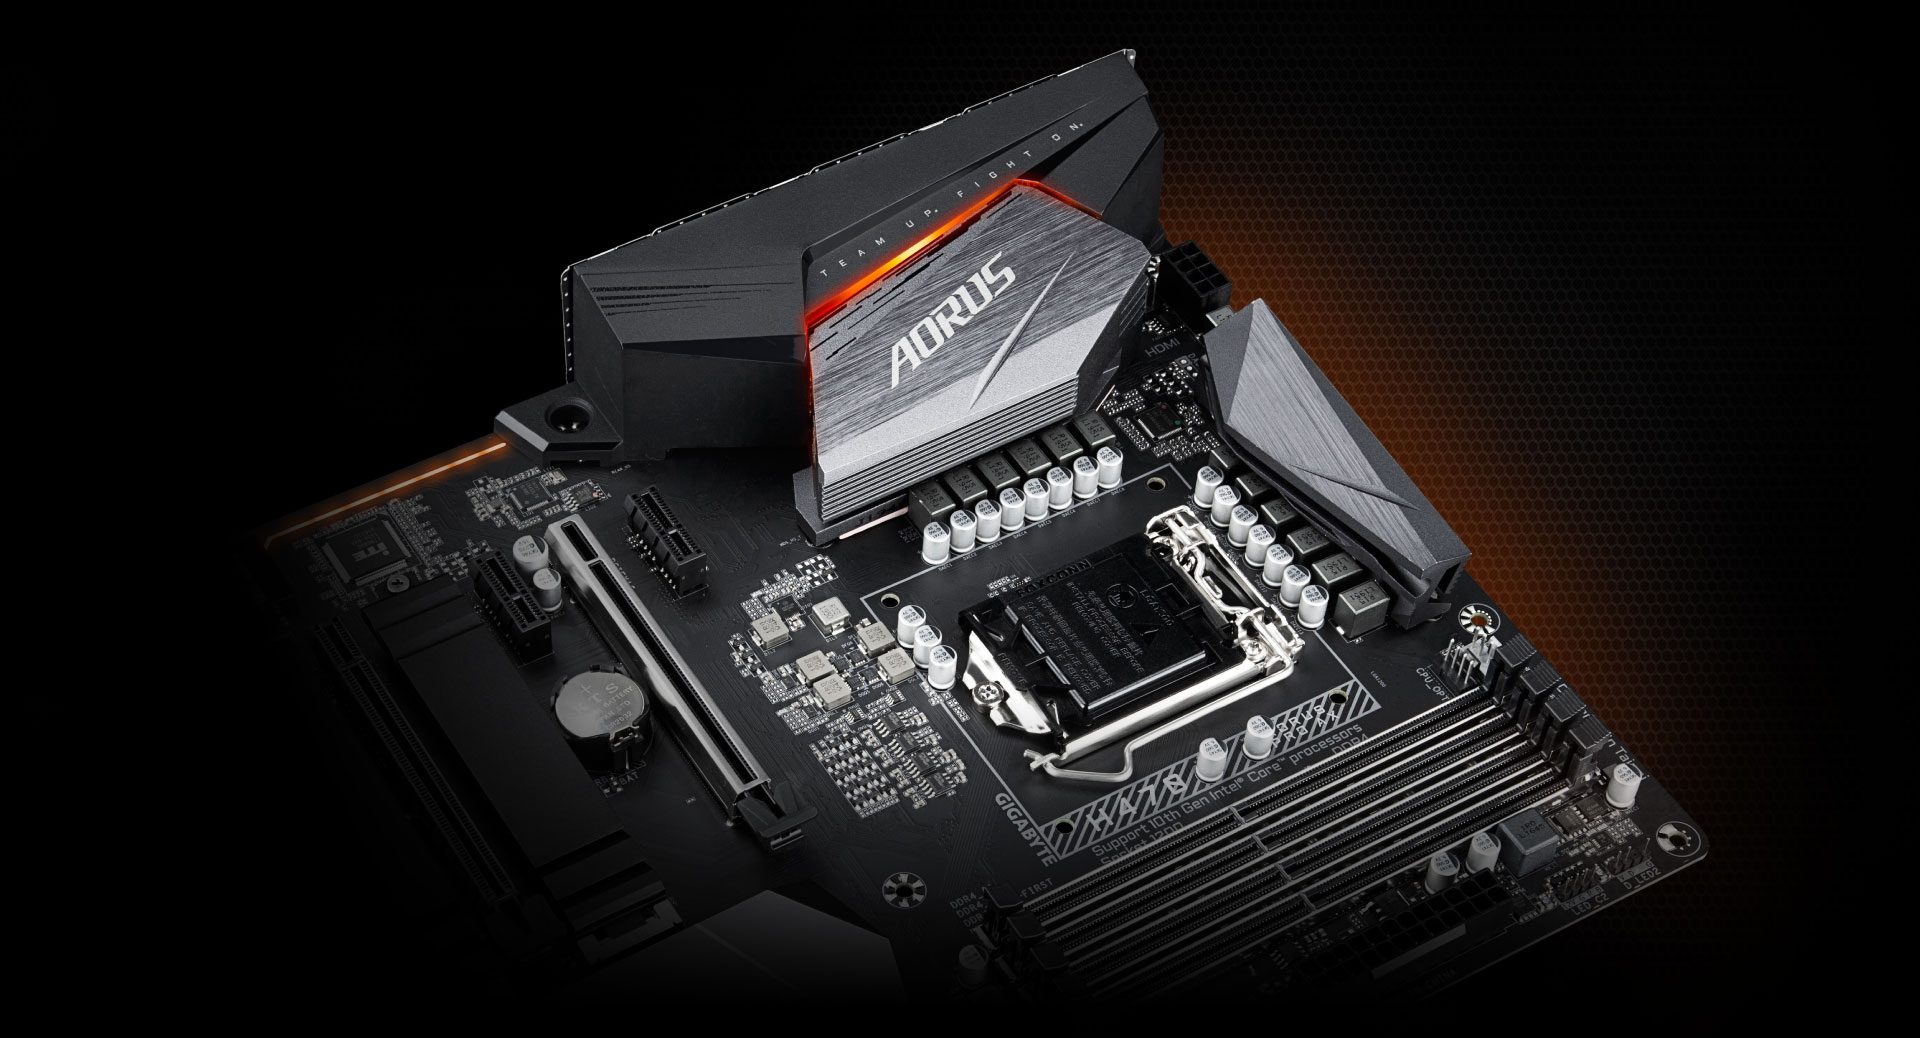 H470 AORUS PRO AX (rev. 1.0) Key Features | Motherboard - GIGABYTE 